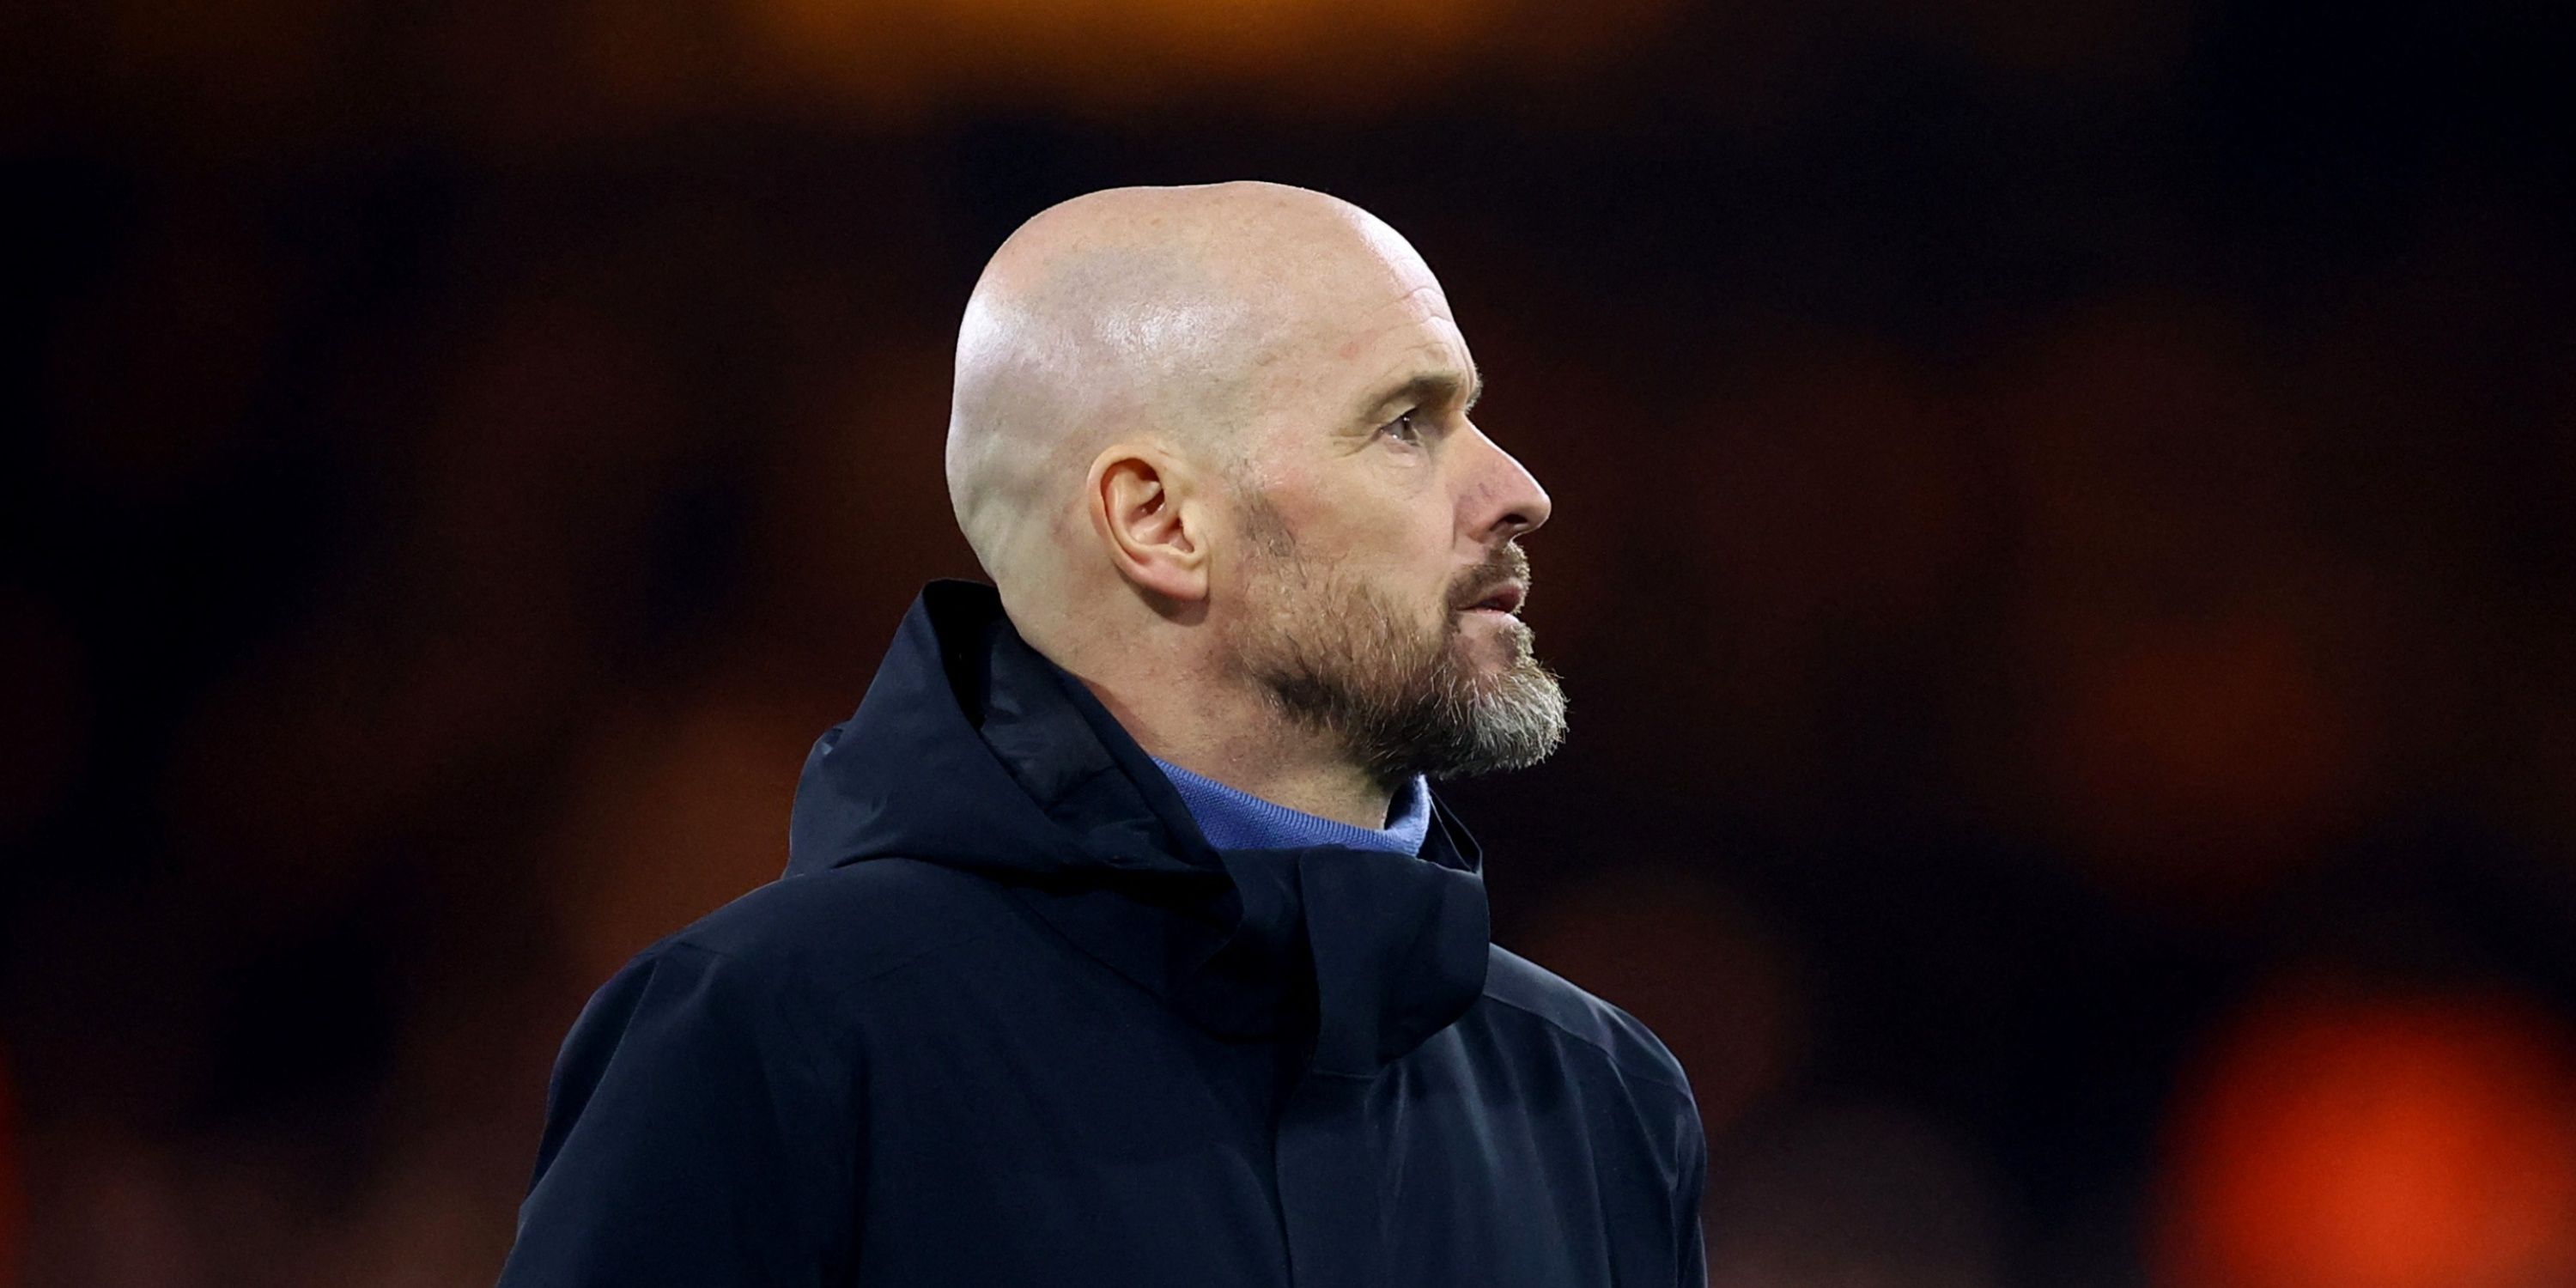 premier league star more likely to join arsenal over ten hag and man utd